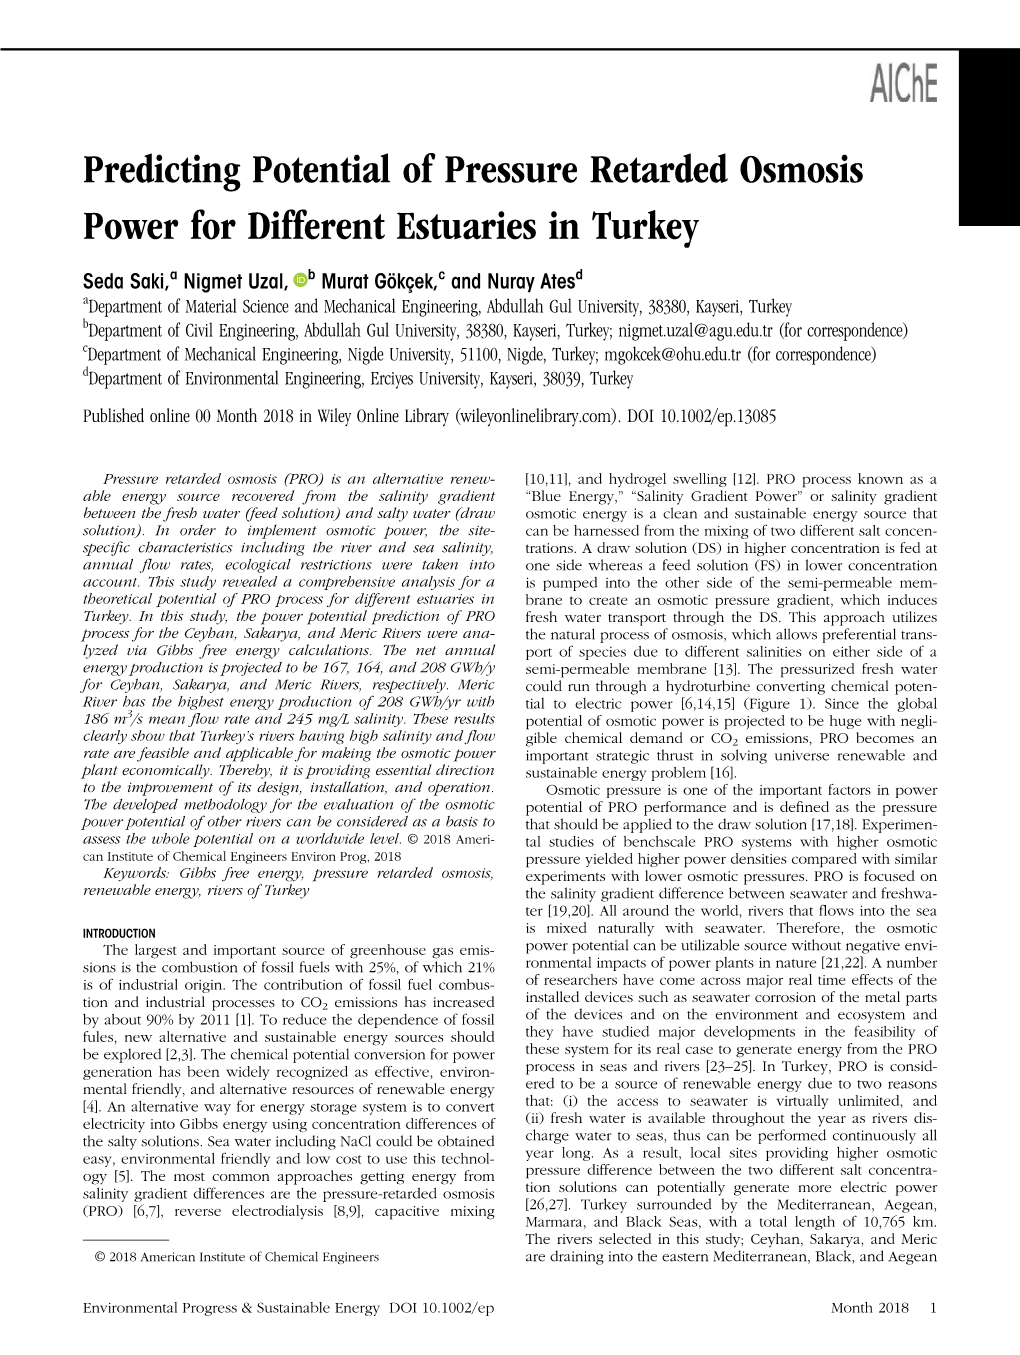 Predicting Potential of Pressure Retarded Osmosis Power for Different Estuaries in Turkey